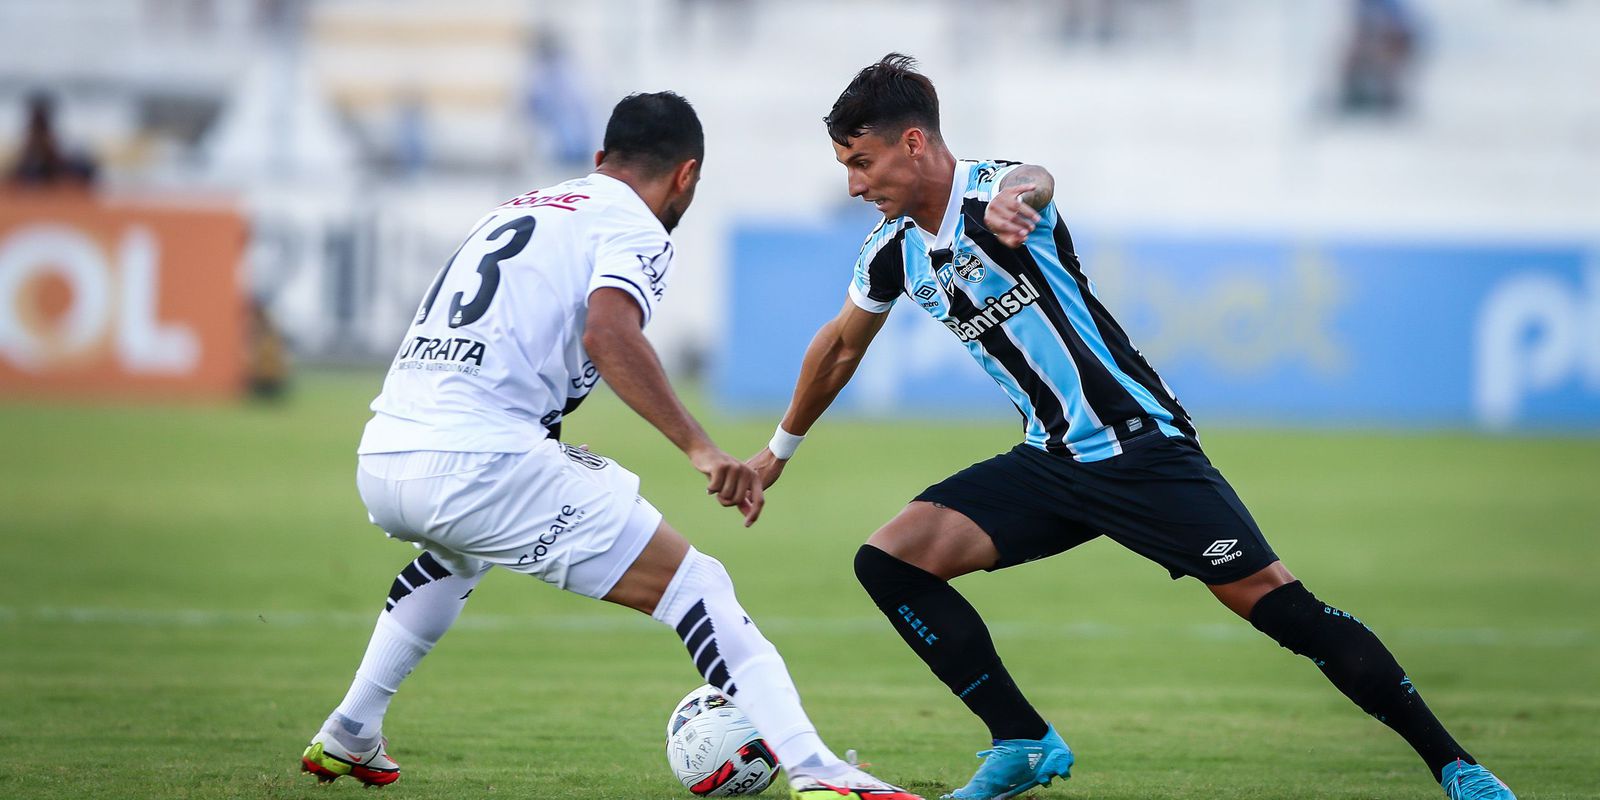 Grêmio is 0-0 with Ponte Preta in the debut of Serie B